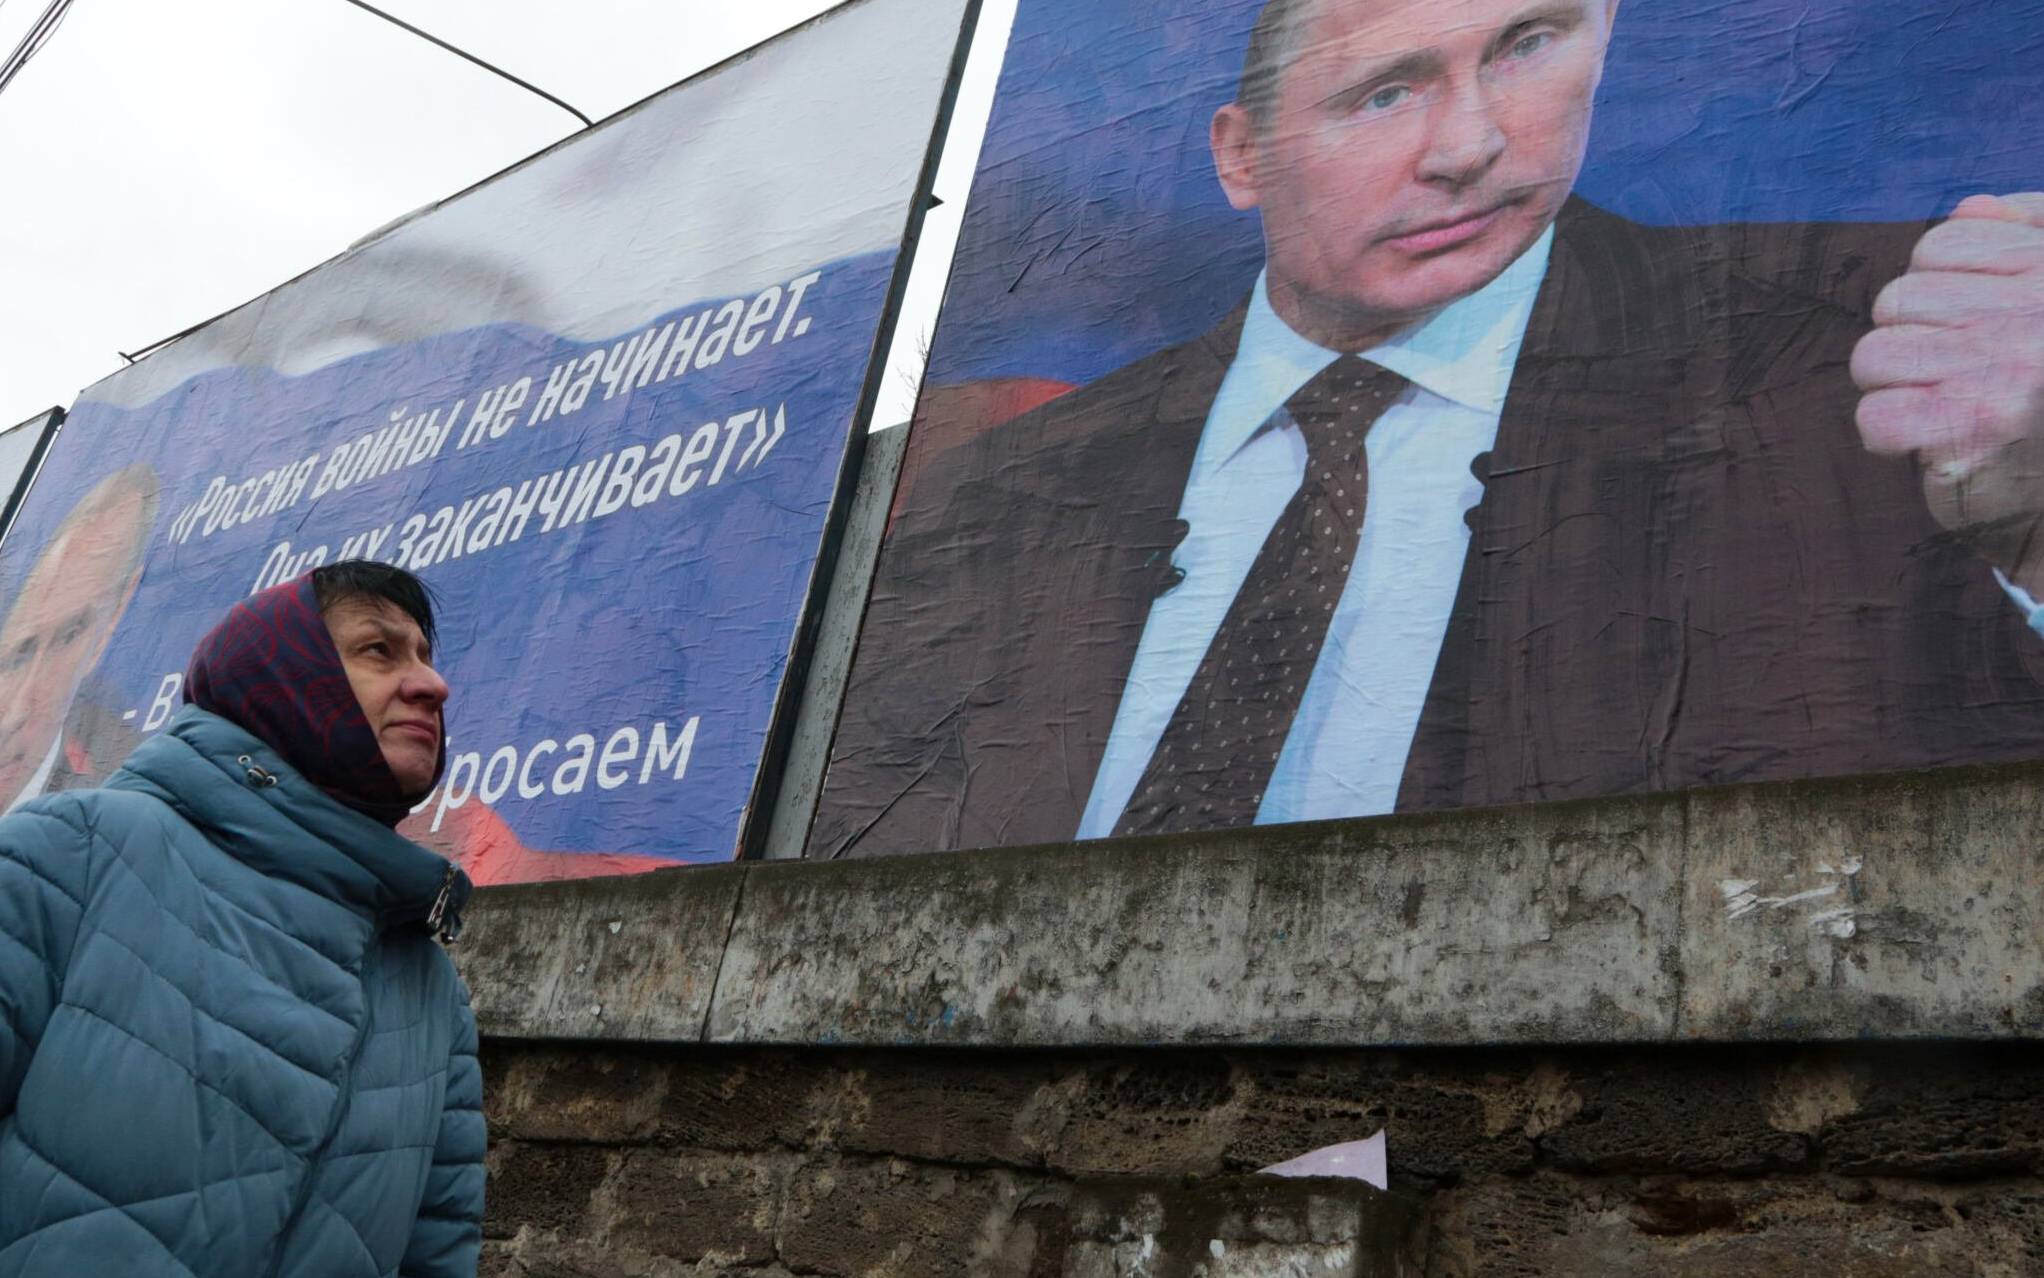 A woman walks past huge placards bearing images of Russian President Vladimir Putin and reading "Russia does not start wars, it ends them" (L) and "We will aim for the demilitarization and denazification of Ukraine" in the city center of Simferopol, Crimea, on March 4, 2022. - Ukraine accused the Kremlin of "nuclear terror" on March 4, after Europe's largest atomic power plant was attacked and taken over by invading forces, sparking Western horror at the threat of Russia's war contaminating all of Europe. (Photo by STRINGER / AFP)